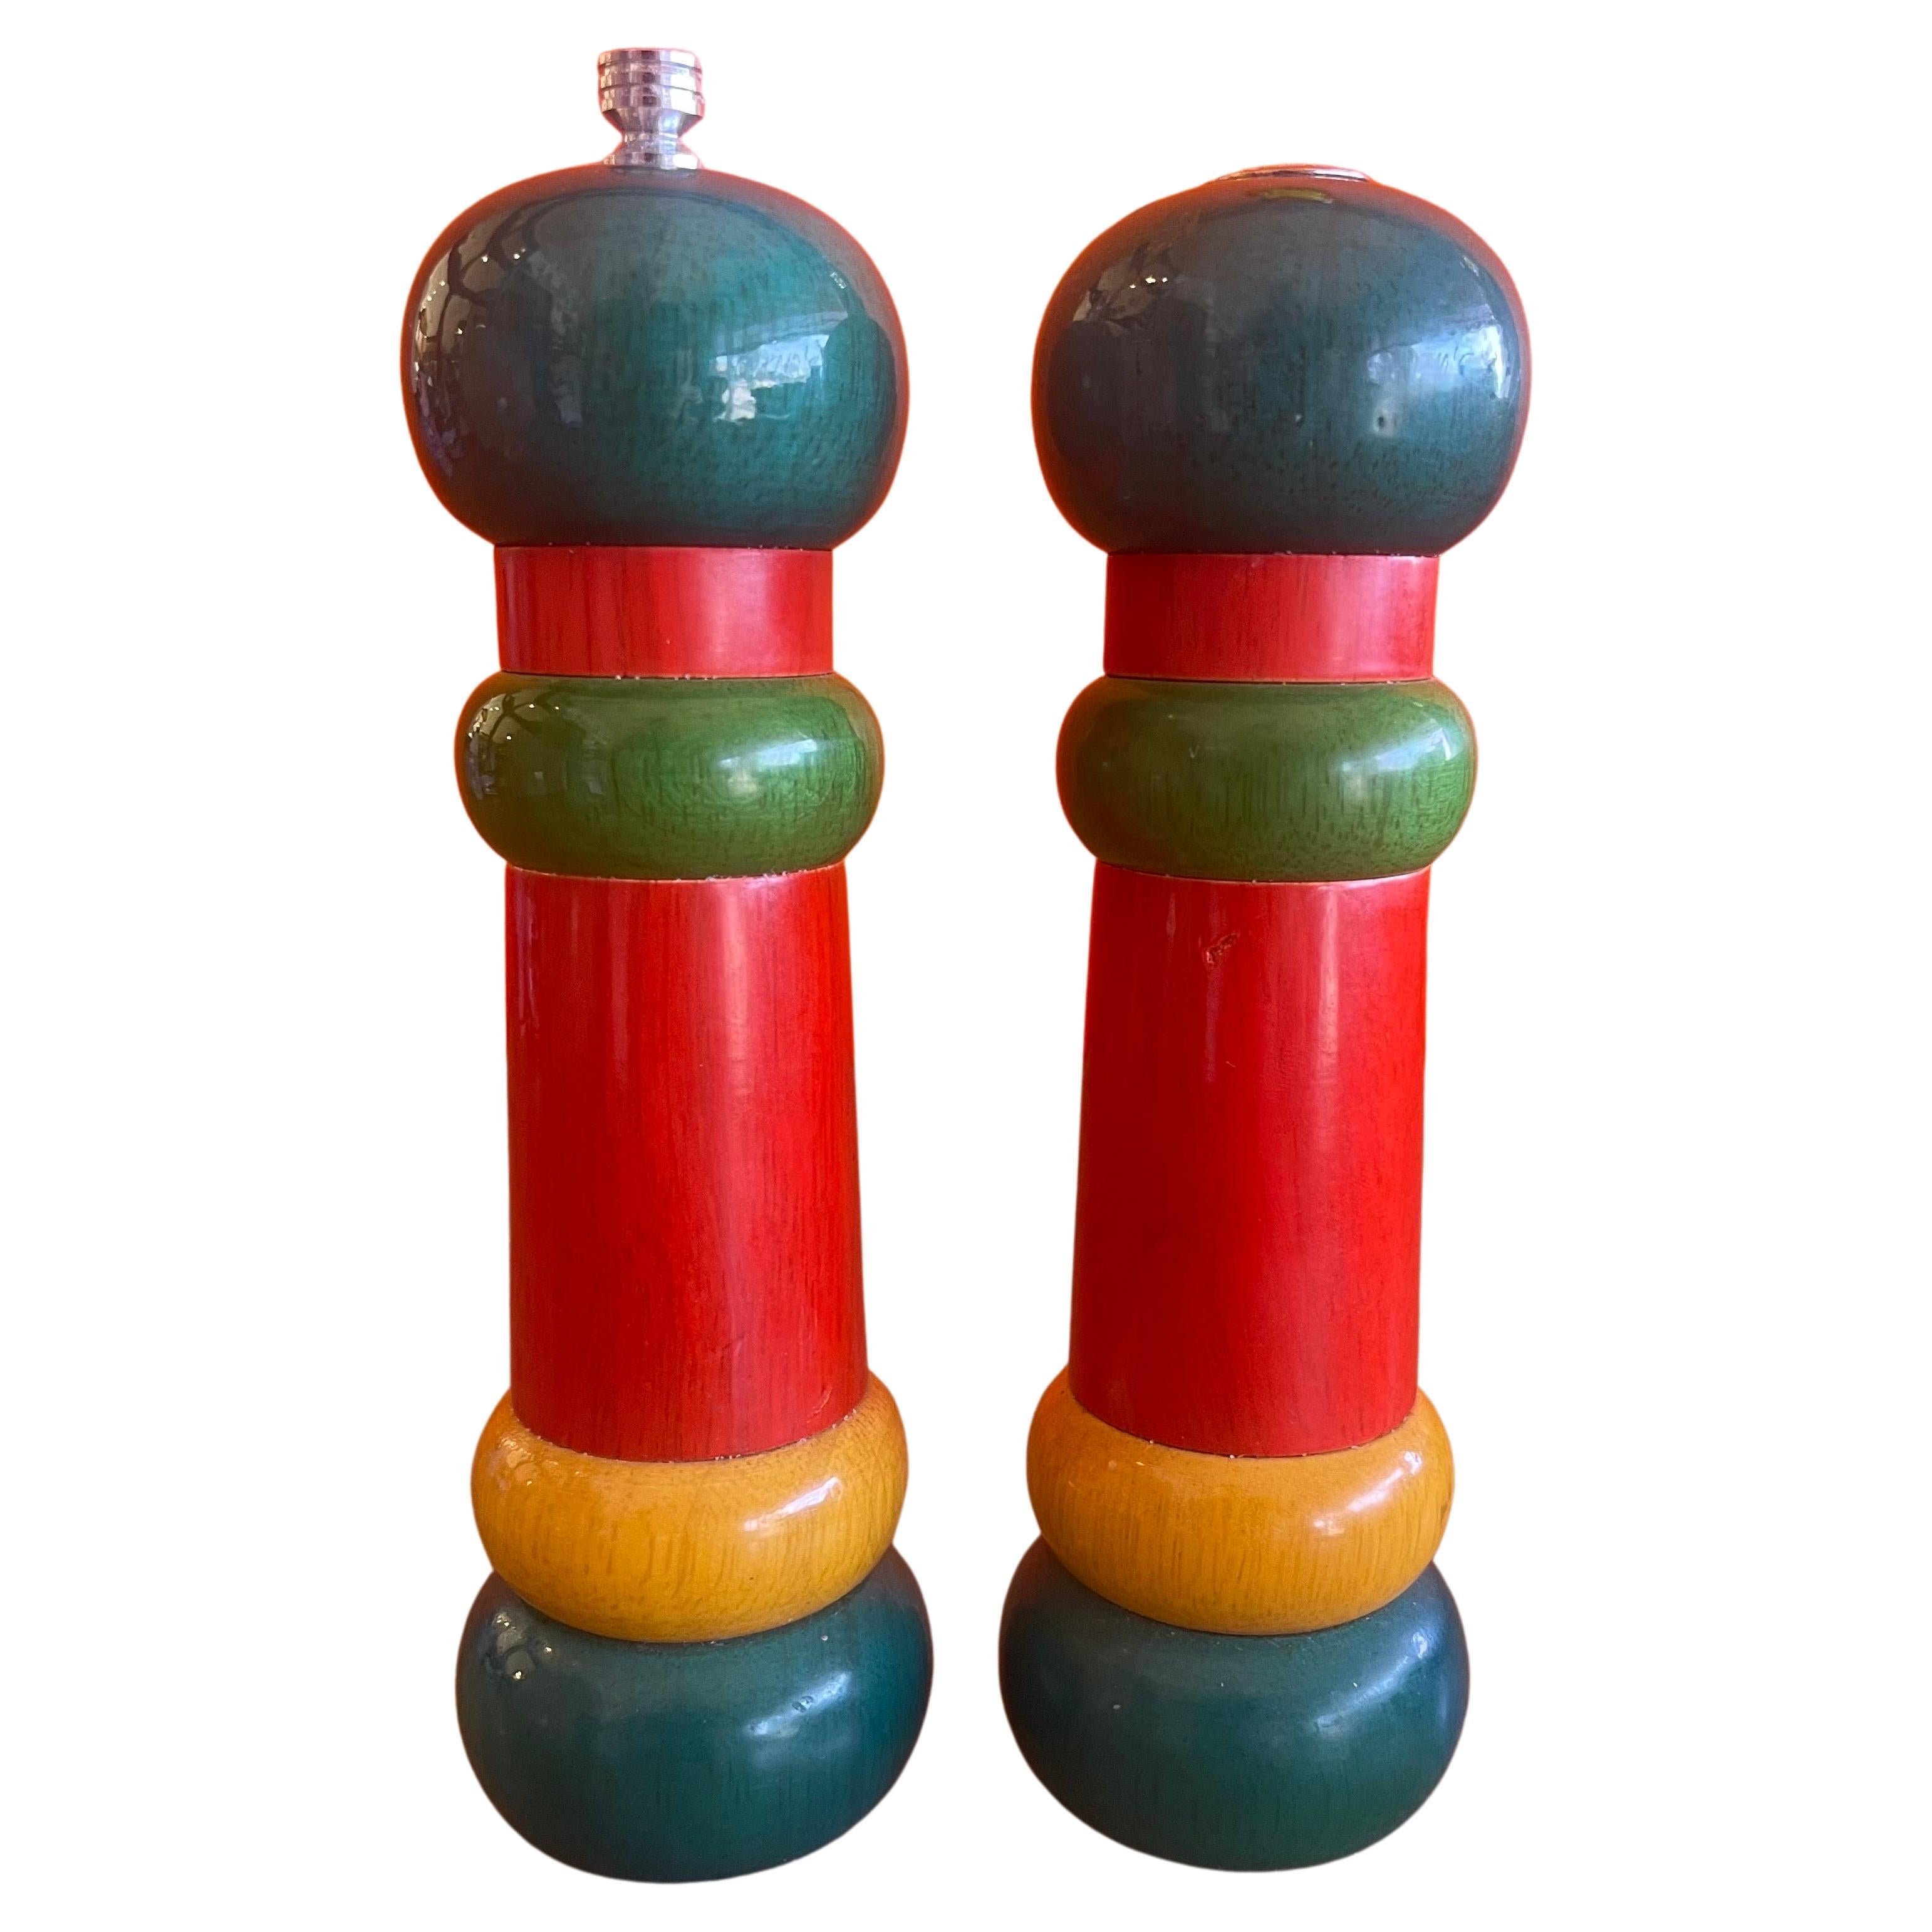 A very nice pair of post-modern Memphis style salt and pepper shakers by Olde Thompson, circa 1980s. The set is constructed of hard wood with colorful high lacquered paint. The pair are in very good condition and measure 2.25